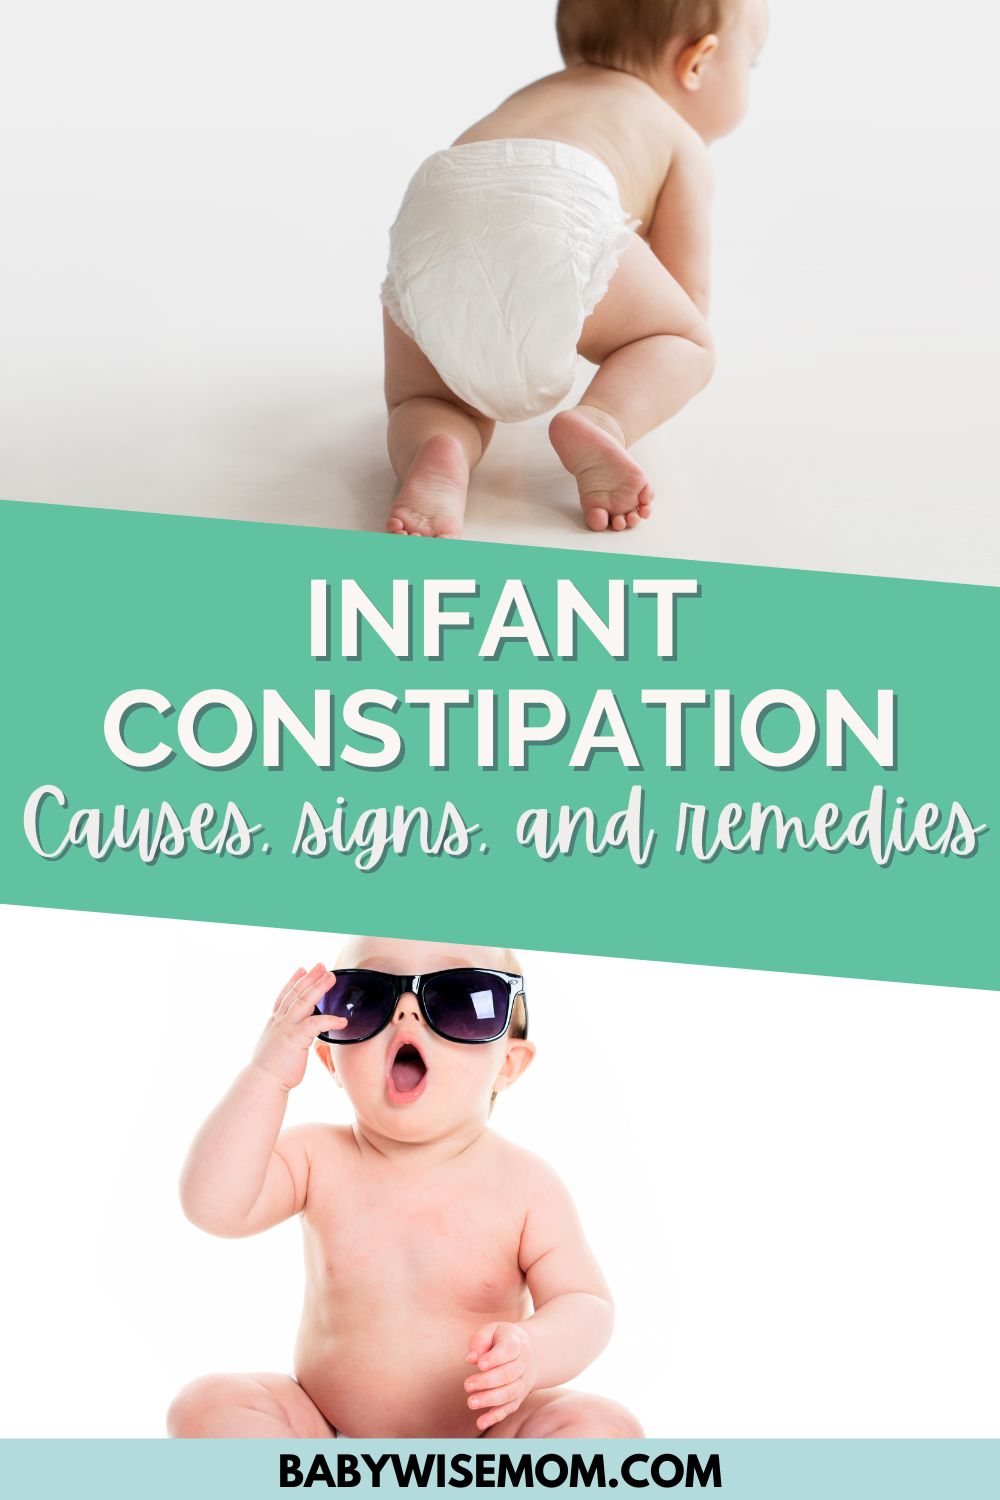 Infant constipation pinnable image